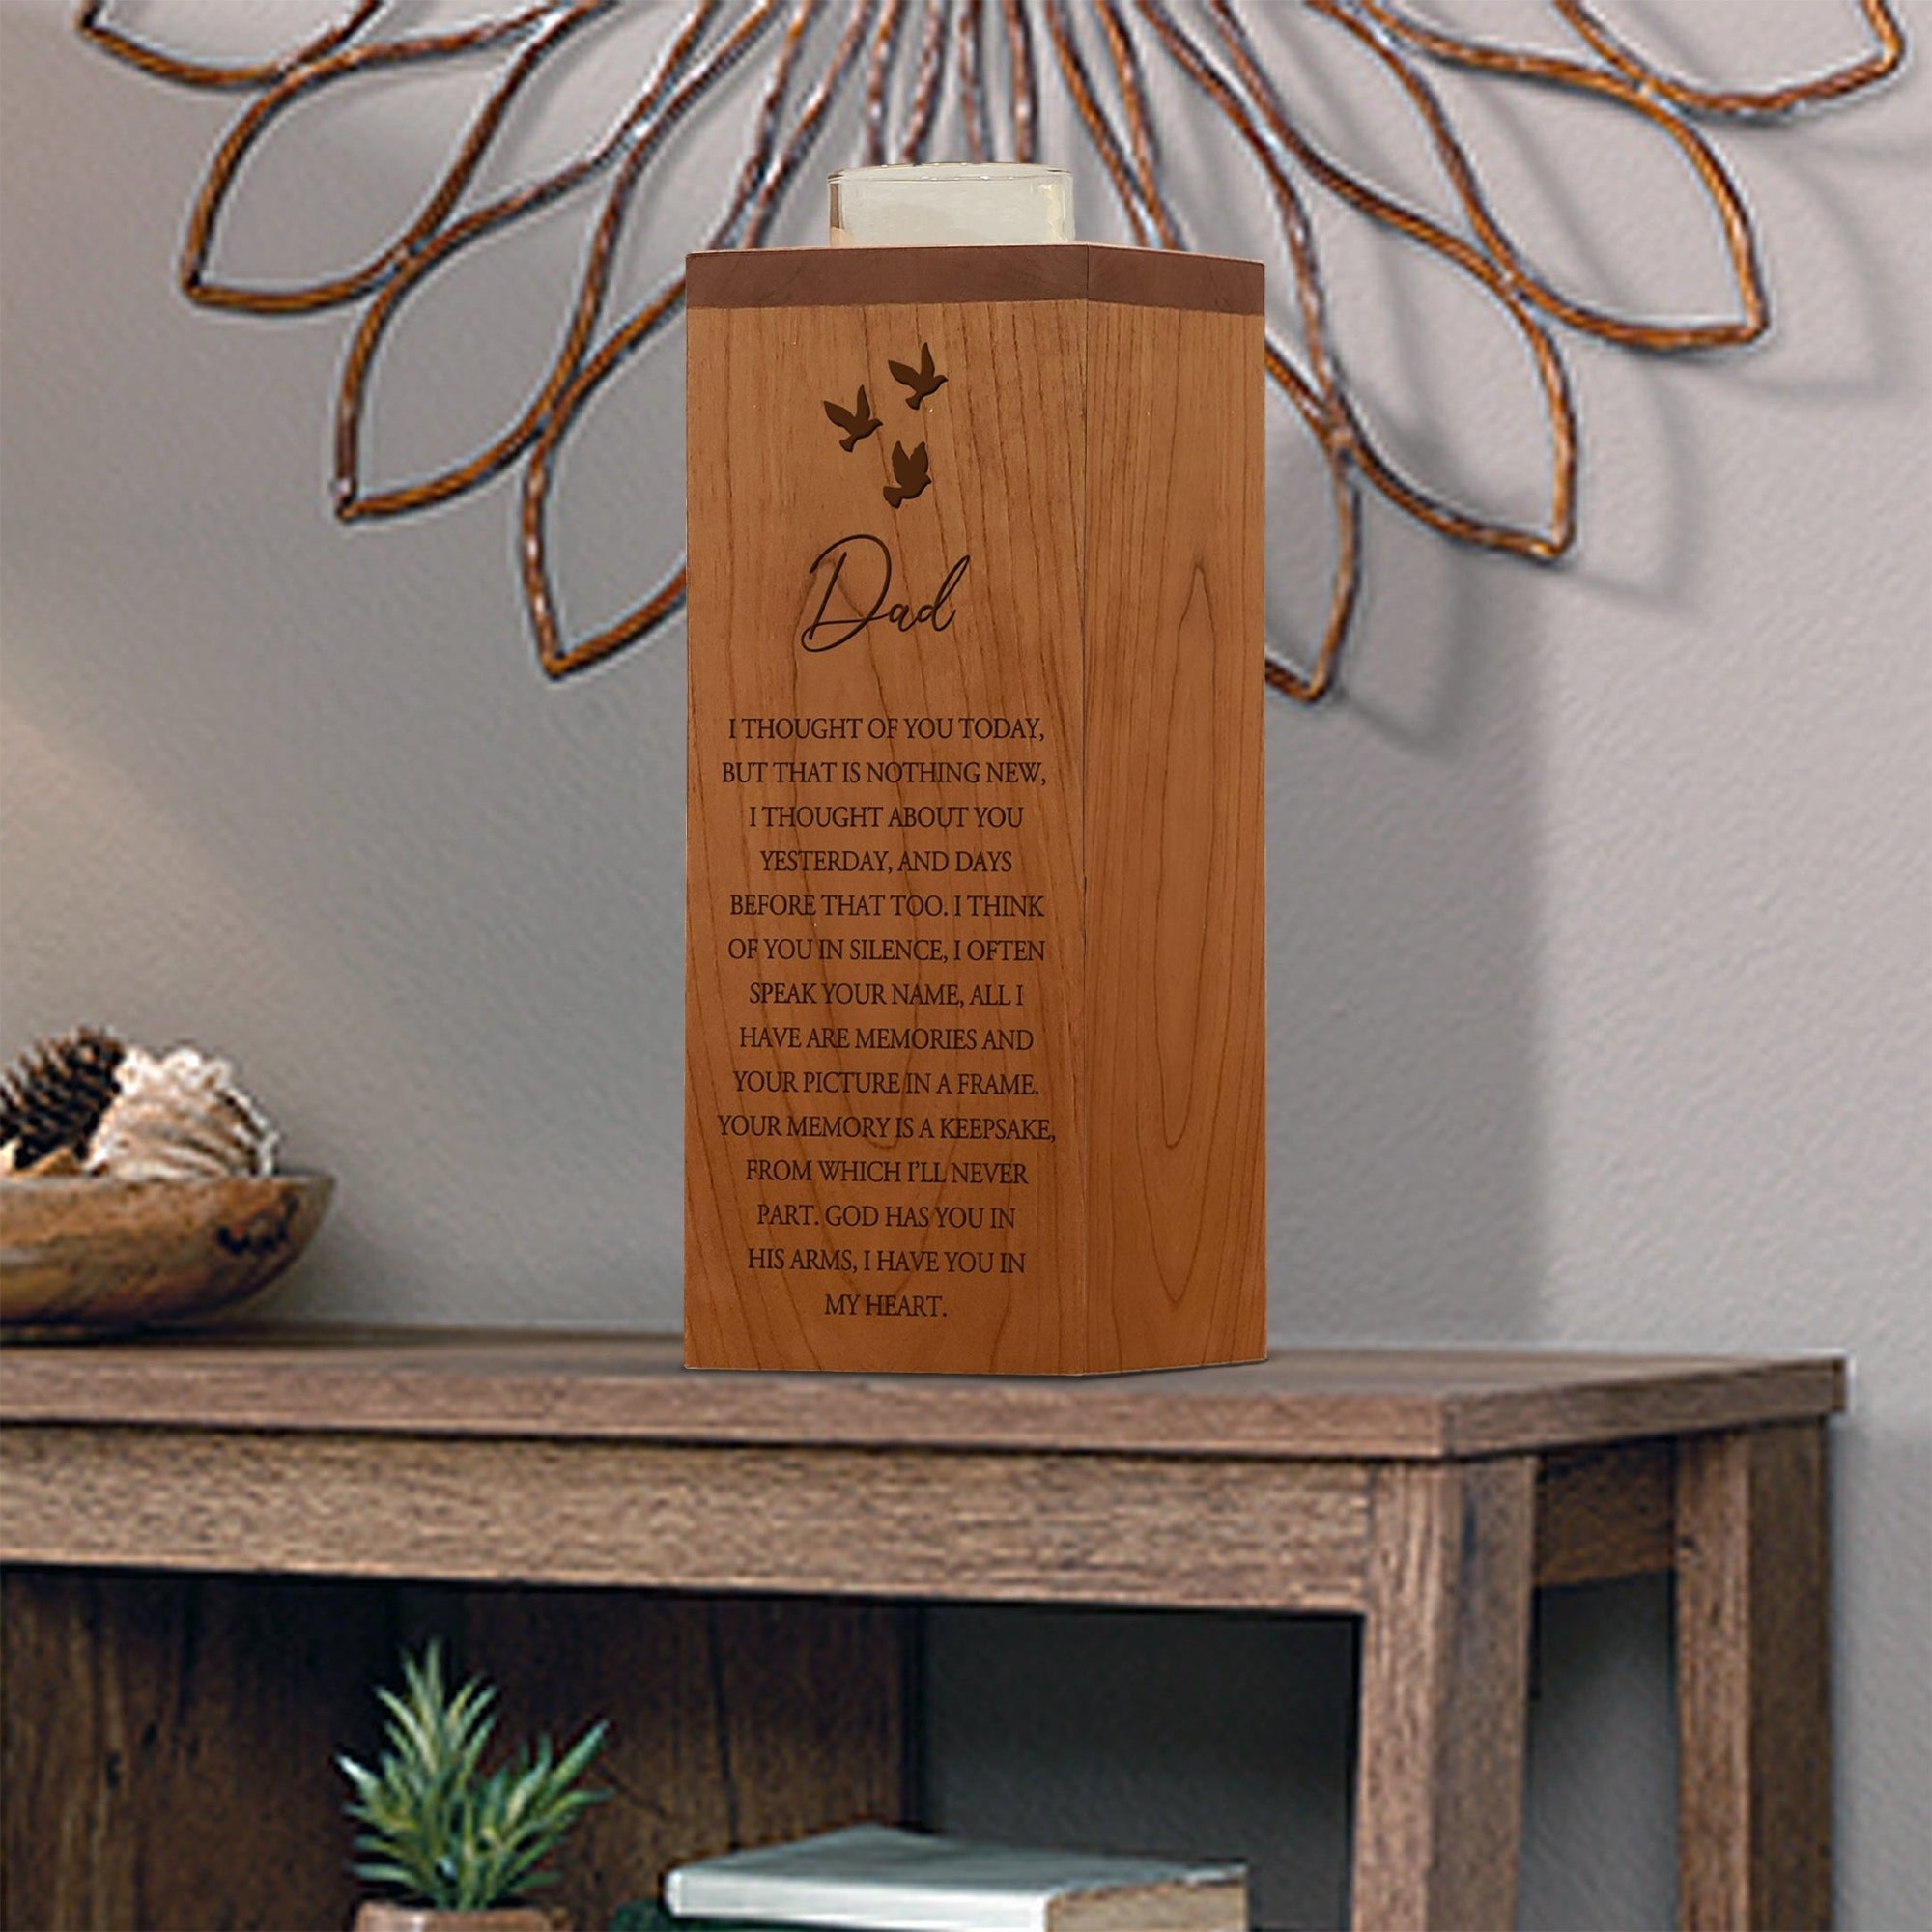 Cozy Cardinal Memorial Vertical Urns With Single Candle Holder For Human Ashes - I Thought Of You Dad - LifeSong Milestones